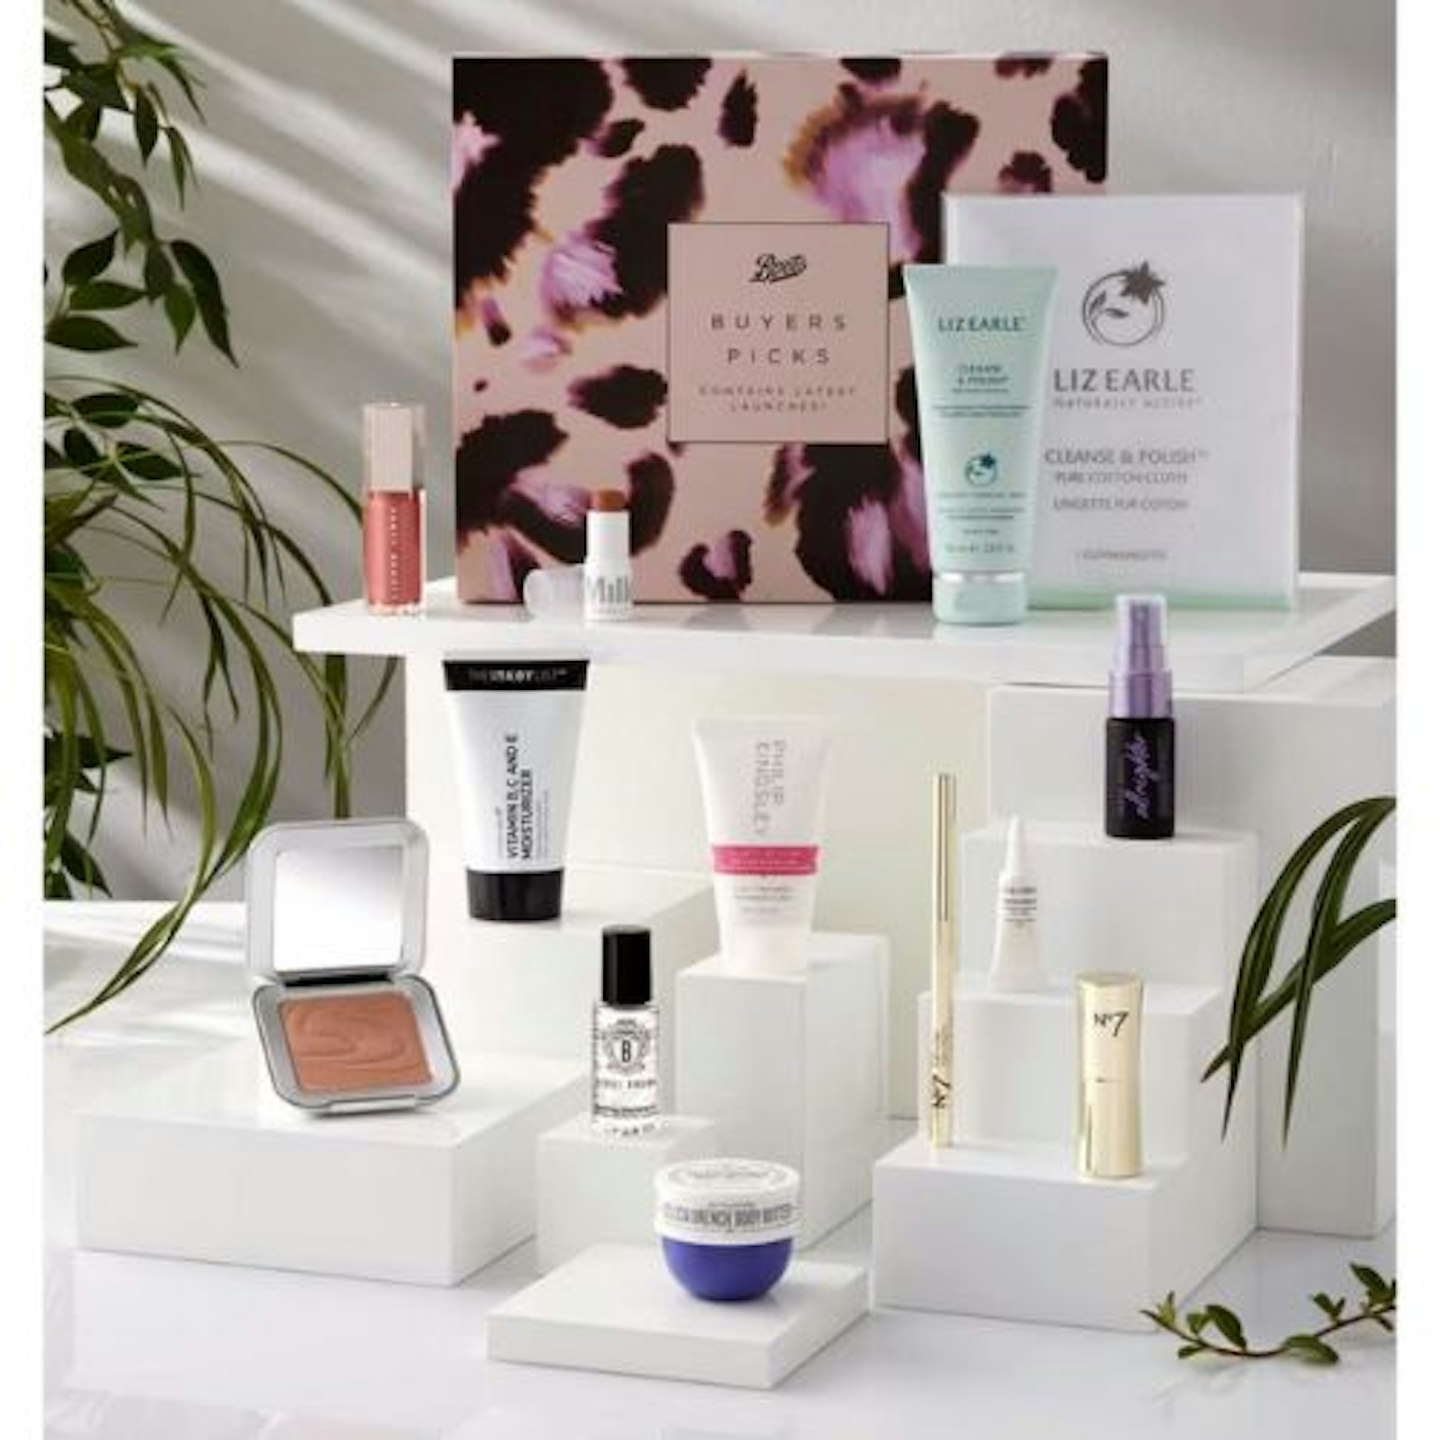 Boots Limited Edition Buyers Picks Beauty Box